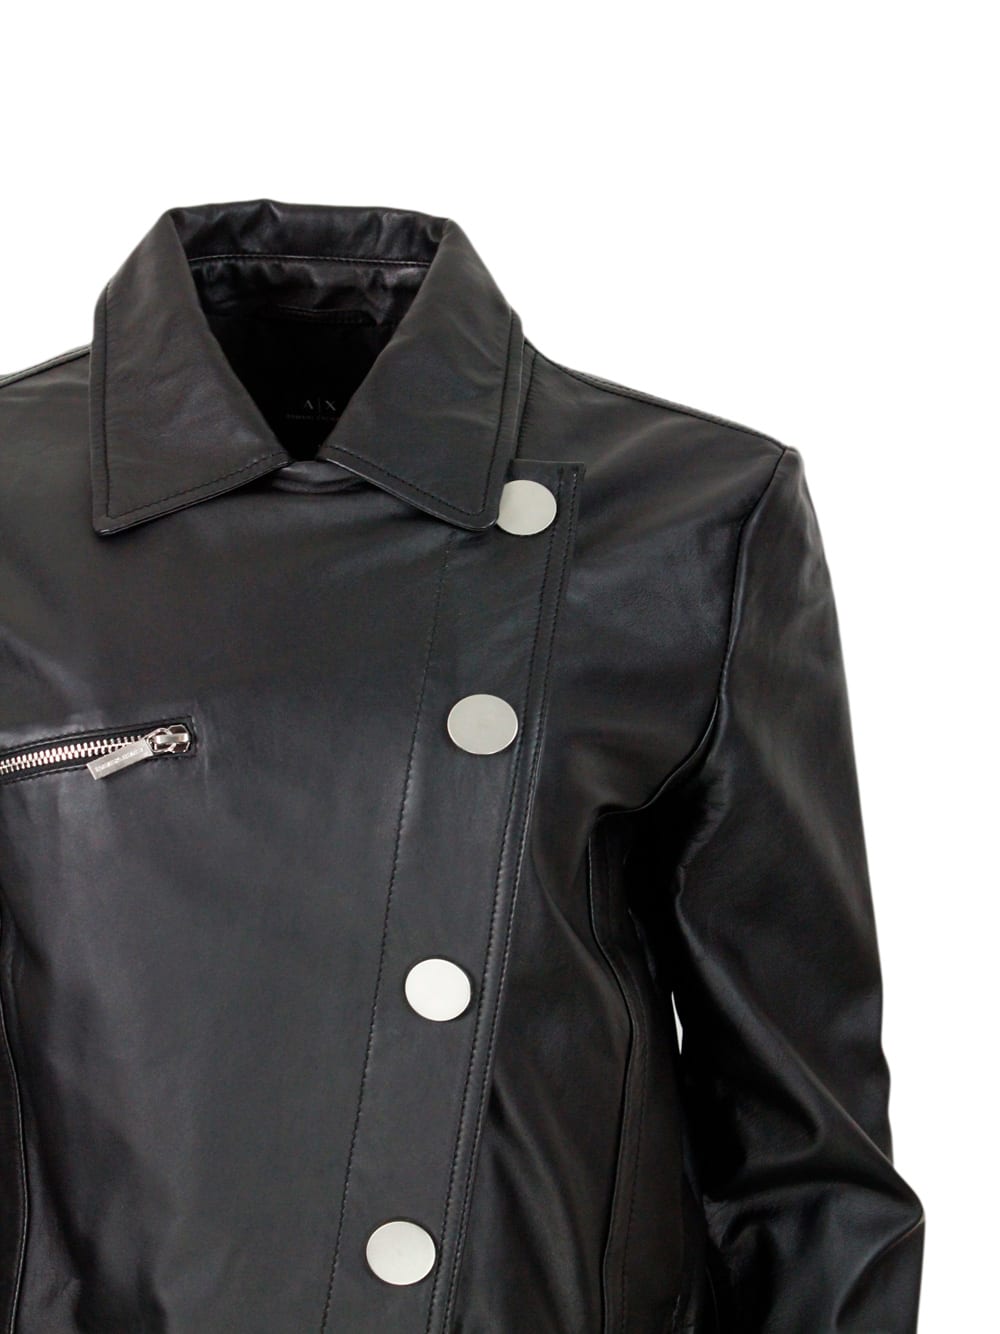 Shop Armani Collezioni Studded Jacket With Button And Zip Closure Made Of Eco-leather With Zip On Pocket And Cuffs In Black